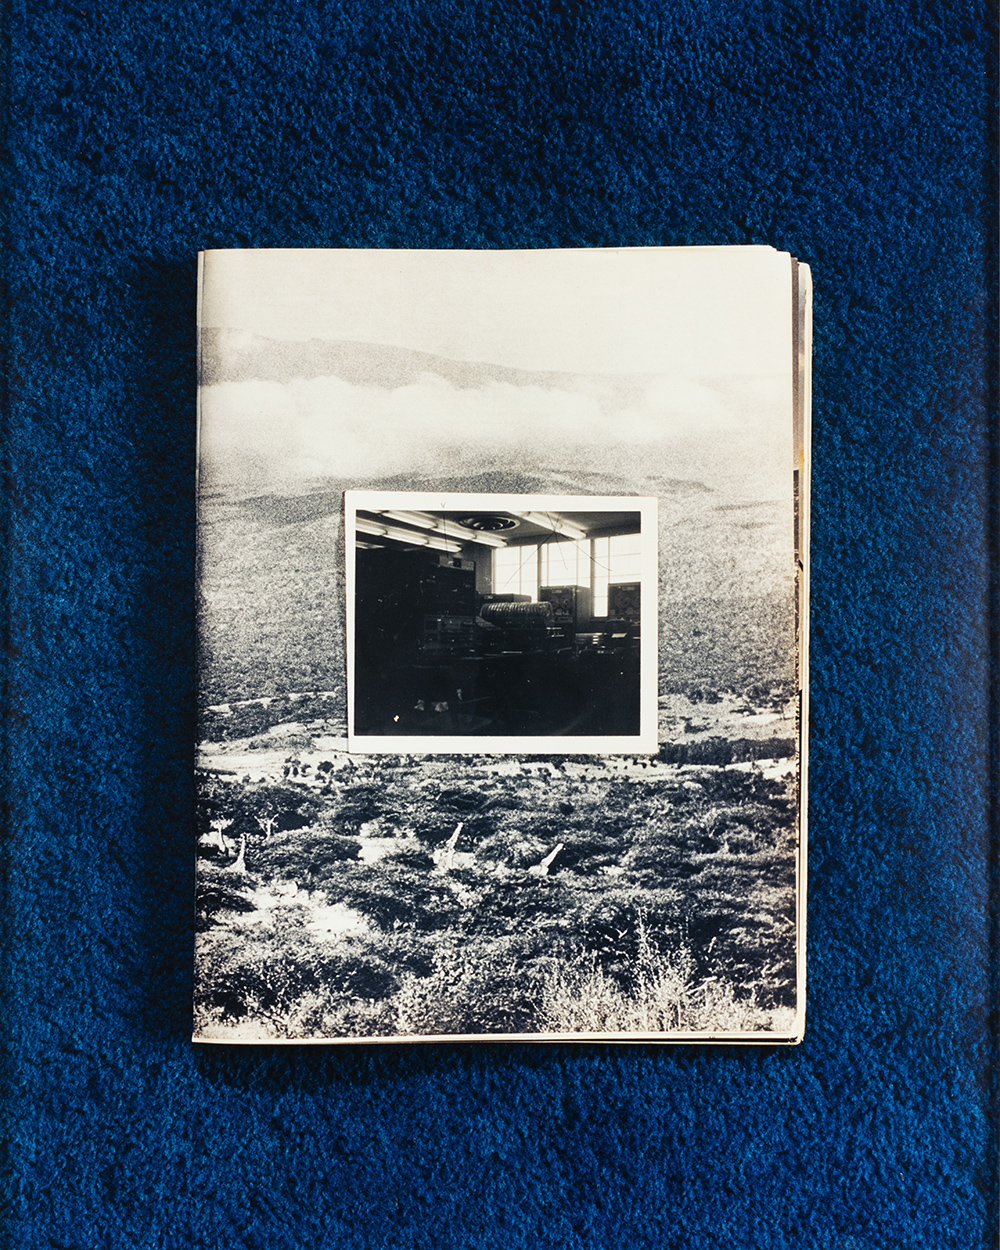 Photograph of a photograph and landscape image from a print publication layered together on a royal blue carpet